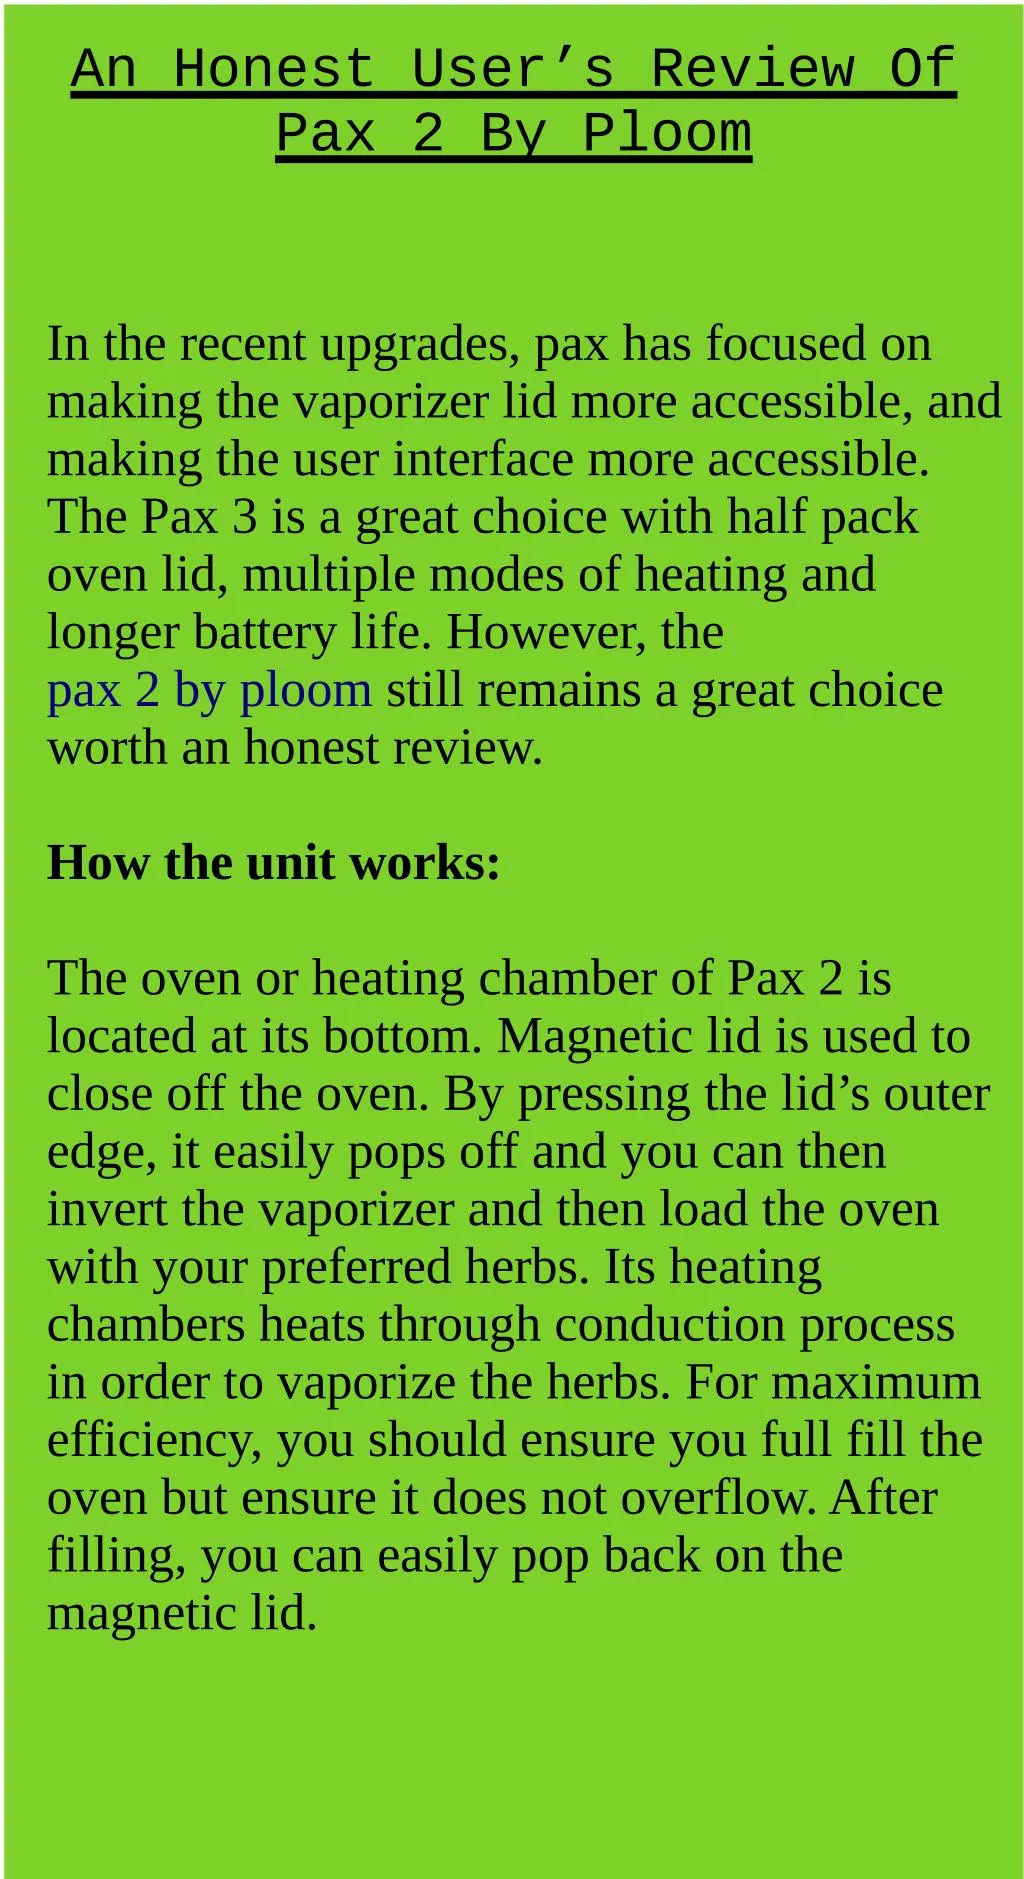 an honest user s review of pax 2 by ploom